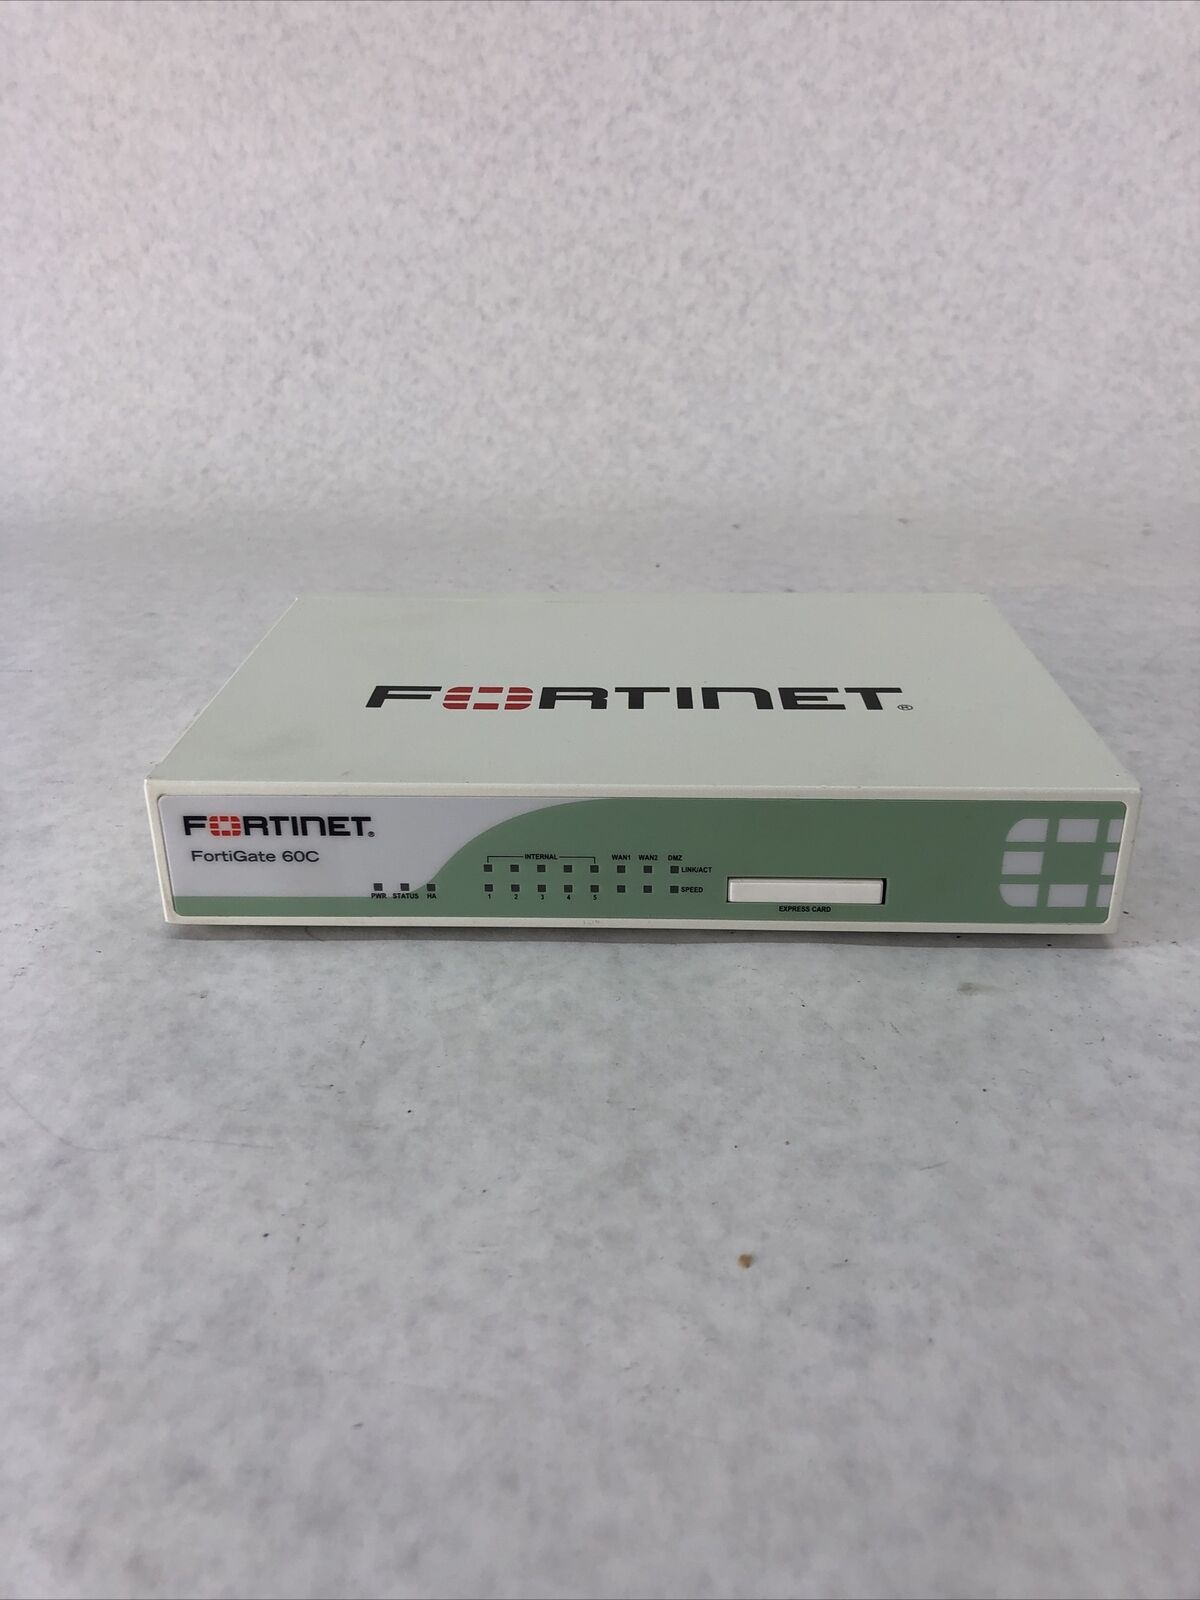 Fortinet FortiGate 60C FG-60C Router Firewall Security Appliance No Power Supply